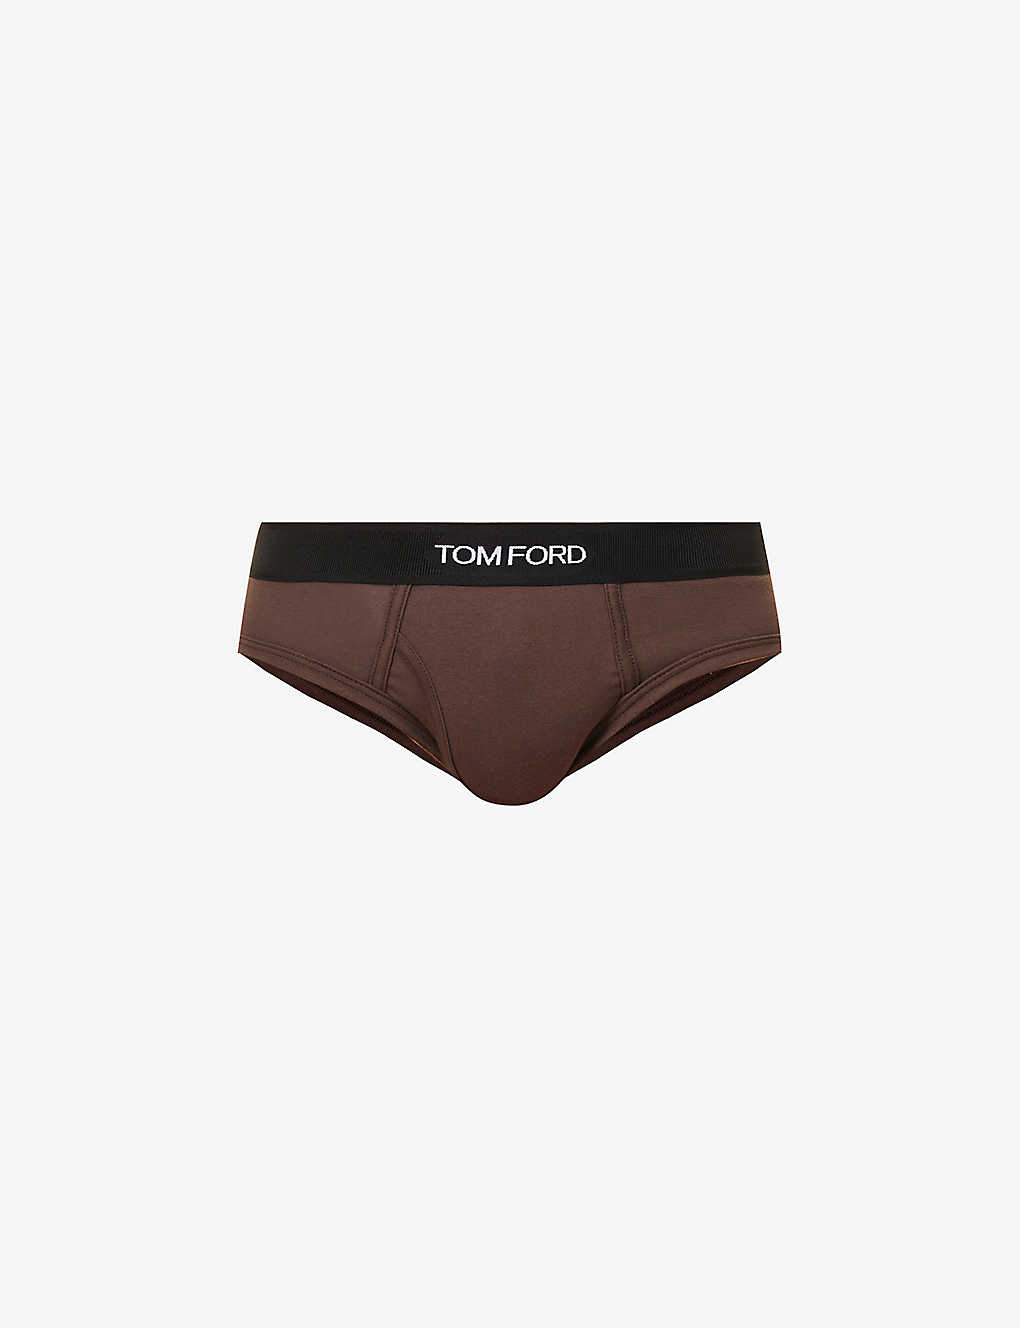 TOM FORD TOM FORD MENS NUDE 8 BRANDED-WAISTBAND STRETCH-COTTON BRIEFS,64625776